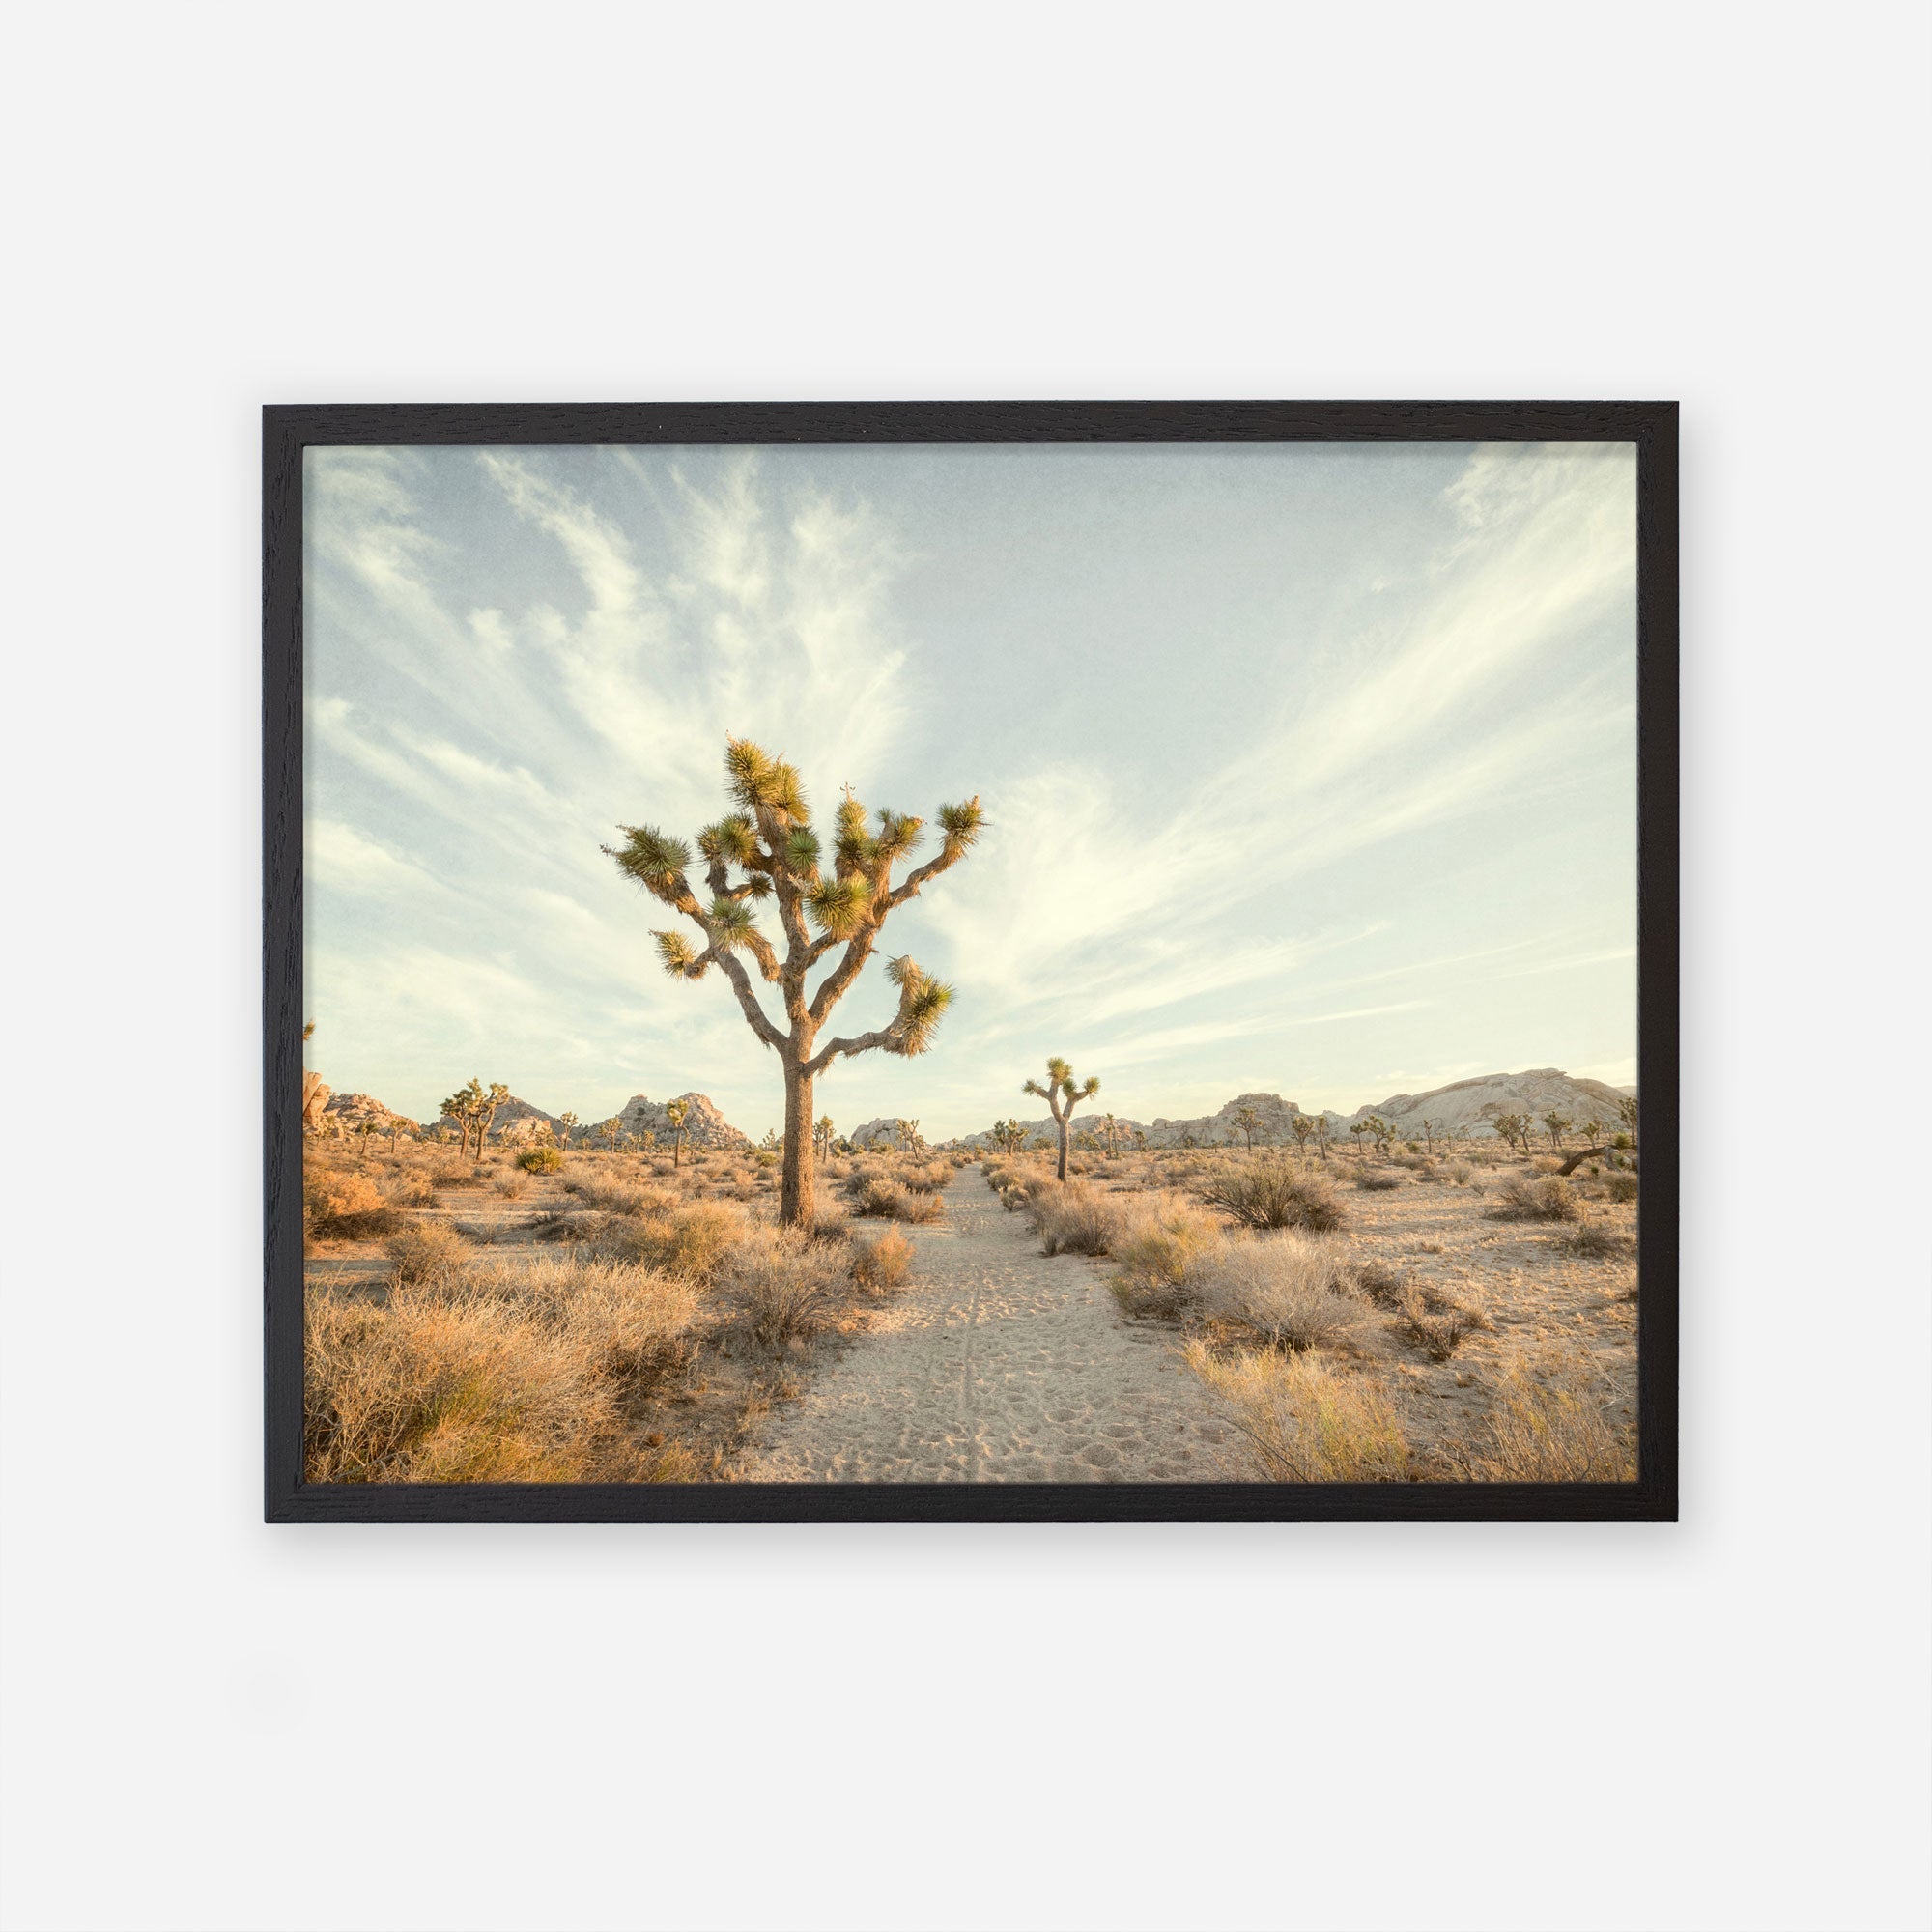 A framed Offley Green photograph of a desert scene featuring a solitary Joshua Tree in the center, surrounded by arid terrain and rock formations under a sky with wispy clouds, printed on archival photographic paper.